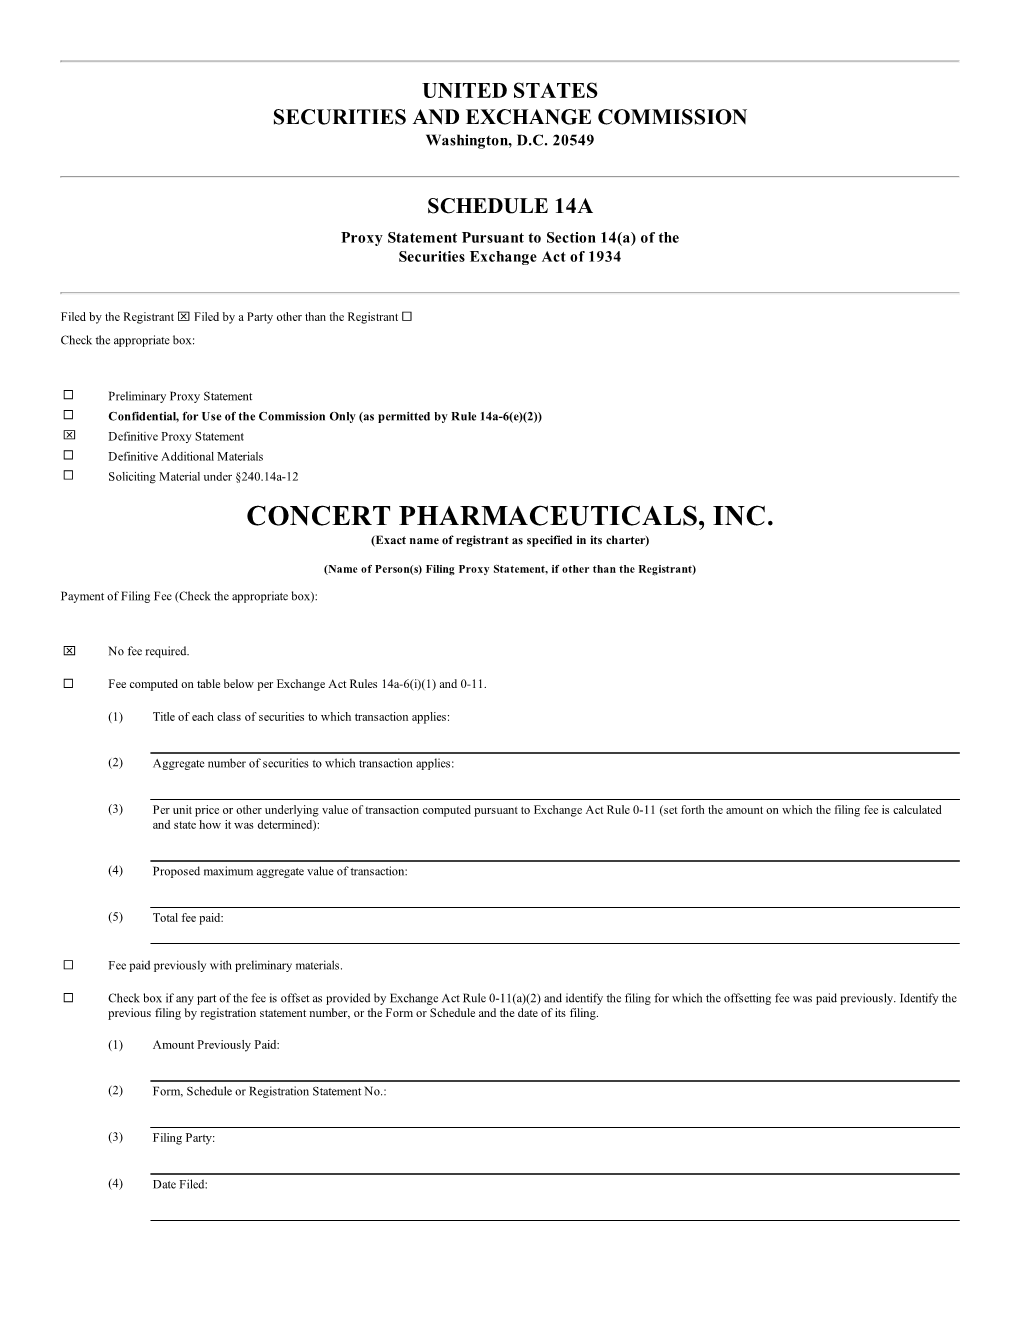 CONCERT PHARMACEUTICALS, INC. (Exact Name of Registrant As Specified in Its Charter)